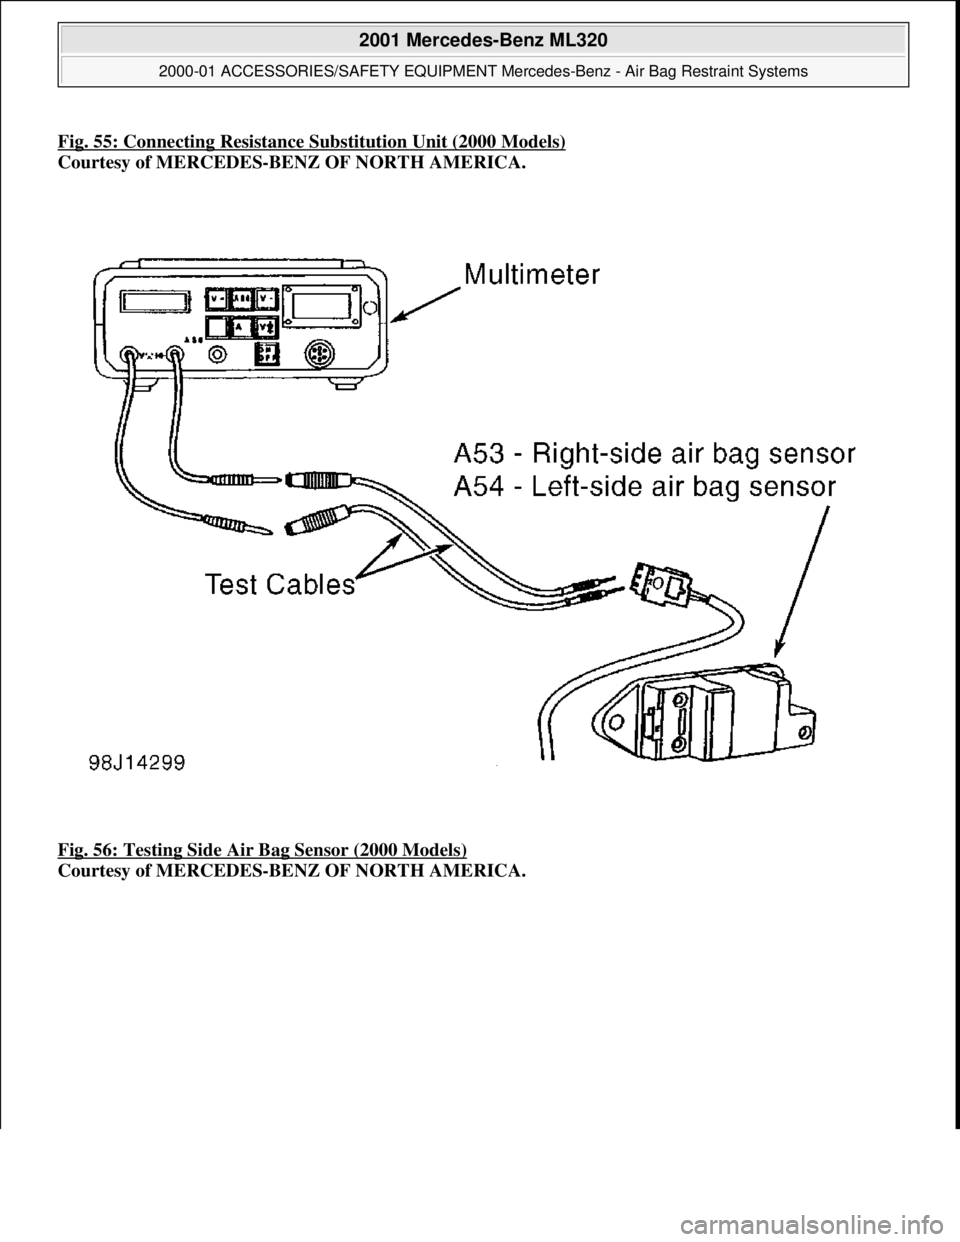 MERCEDES-BENZ ML500 1997  Complete Owners Manual Fig. 55: Connecting Resistance Substituti on Unit (2000 Models)
Courtesy of MERCEDES-BENZ OF NORTH AMERICA.   
Fig. 56: Testing Side Air   Bag Sensor (2000 Models)
  
Courtesy of MERCEDES-BENZ OF NORT